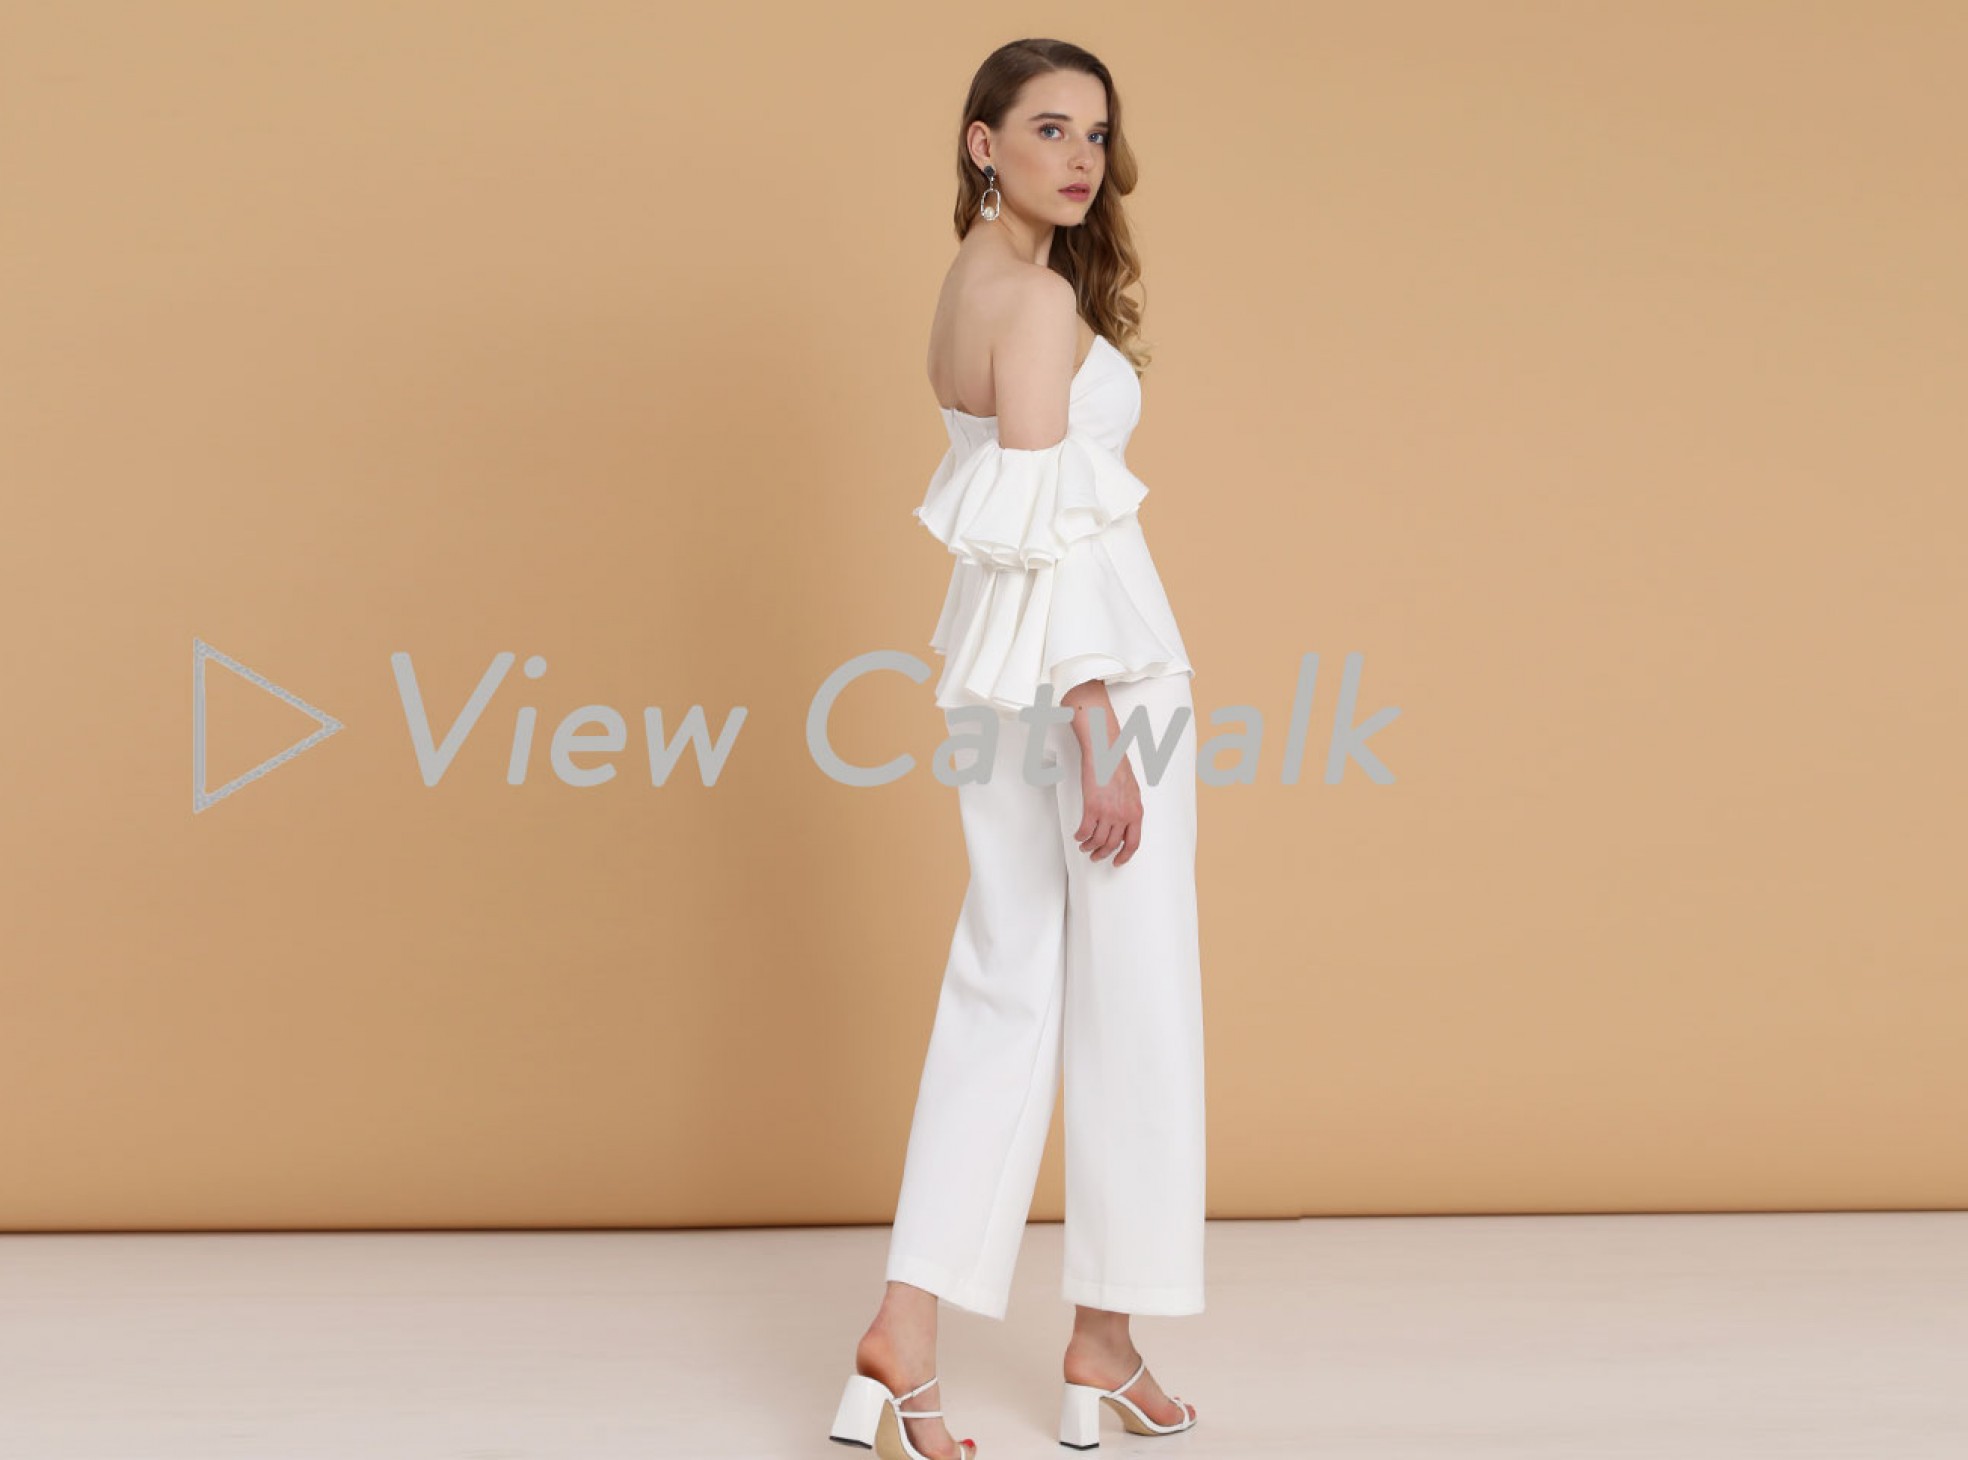 bandeau top with ruffle sleeve in ivory